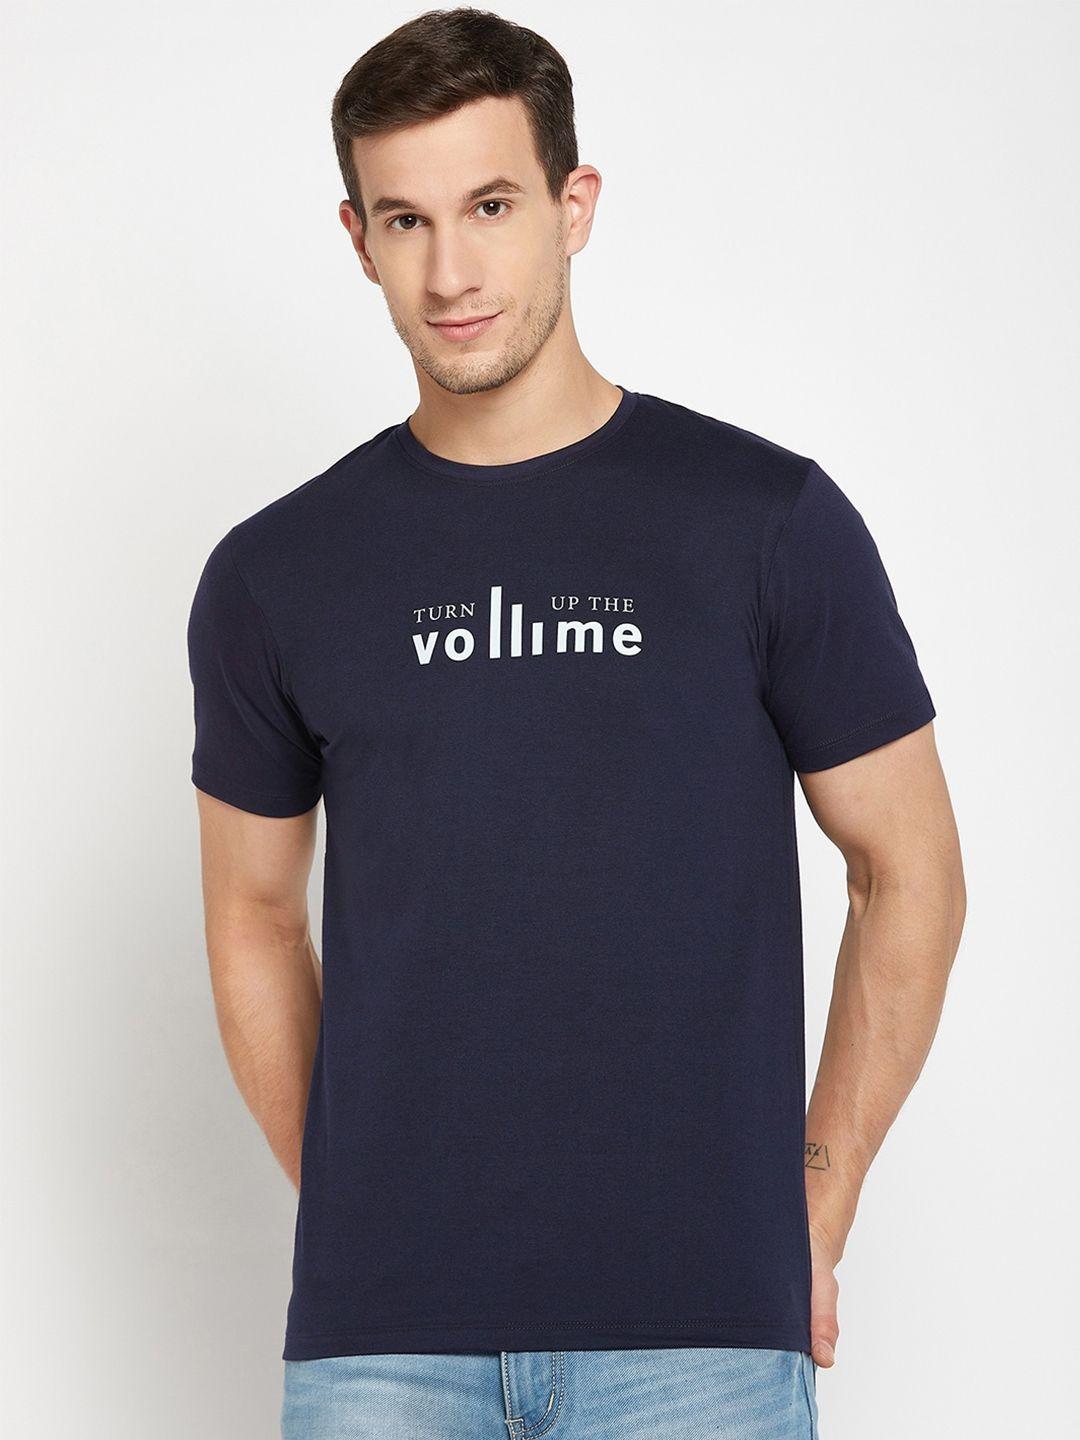 mast & harbour navy blue typography printed pure cotton t-shirt